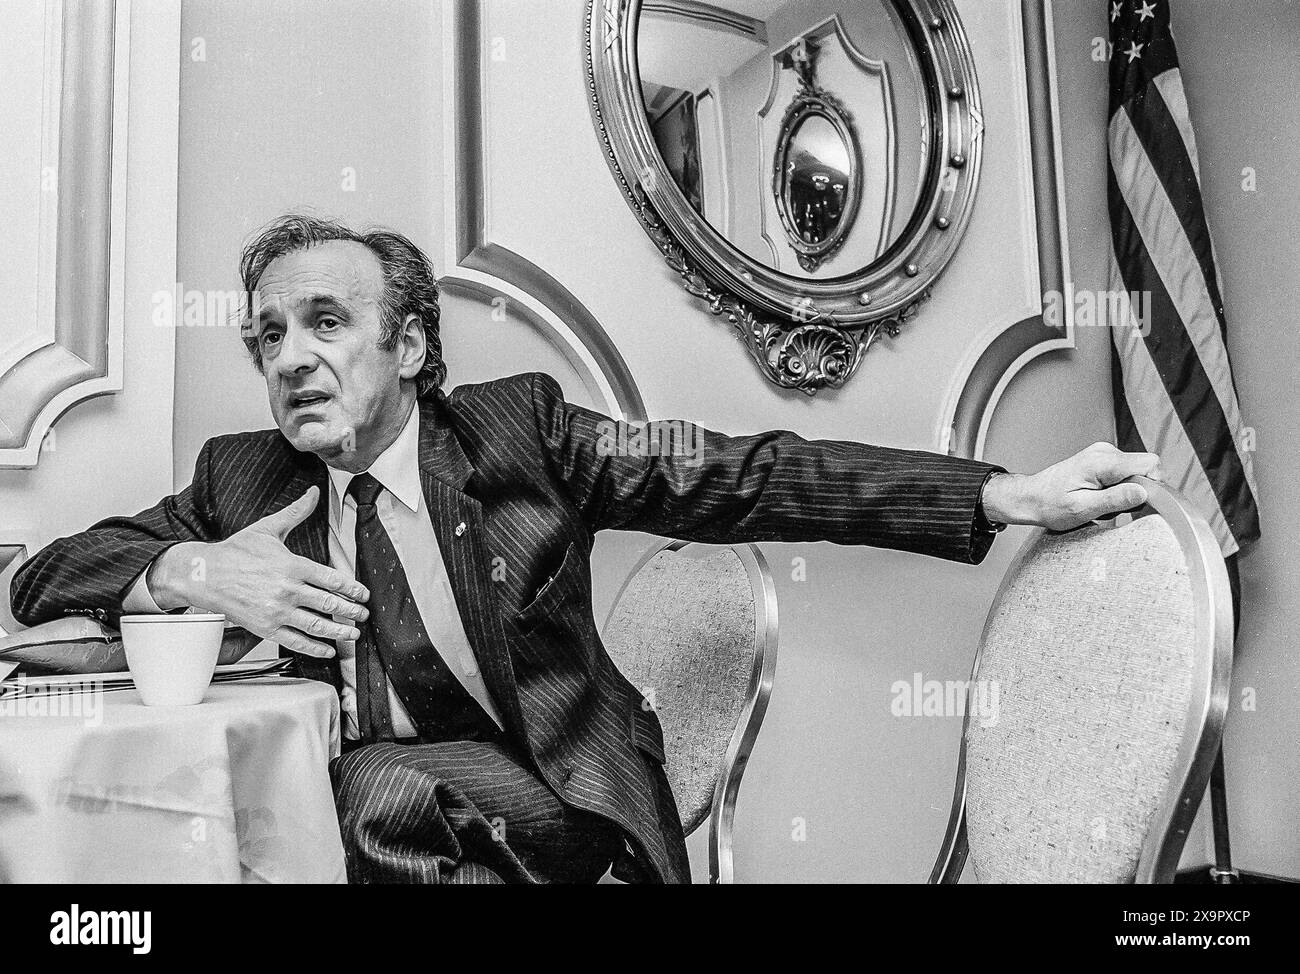 Nobel Prize winner Eli Wiesel backstage before speaking to the United Jewish Appeal Convention, Washington, D.C., USA, Michael Geissinger, 1988 Stock Photo